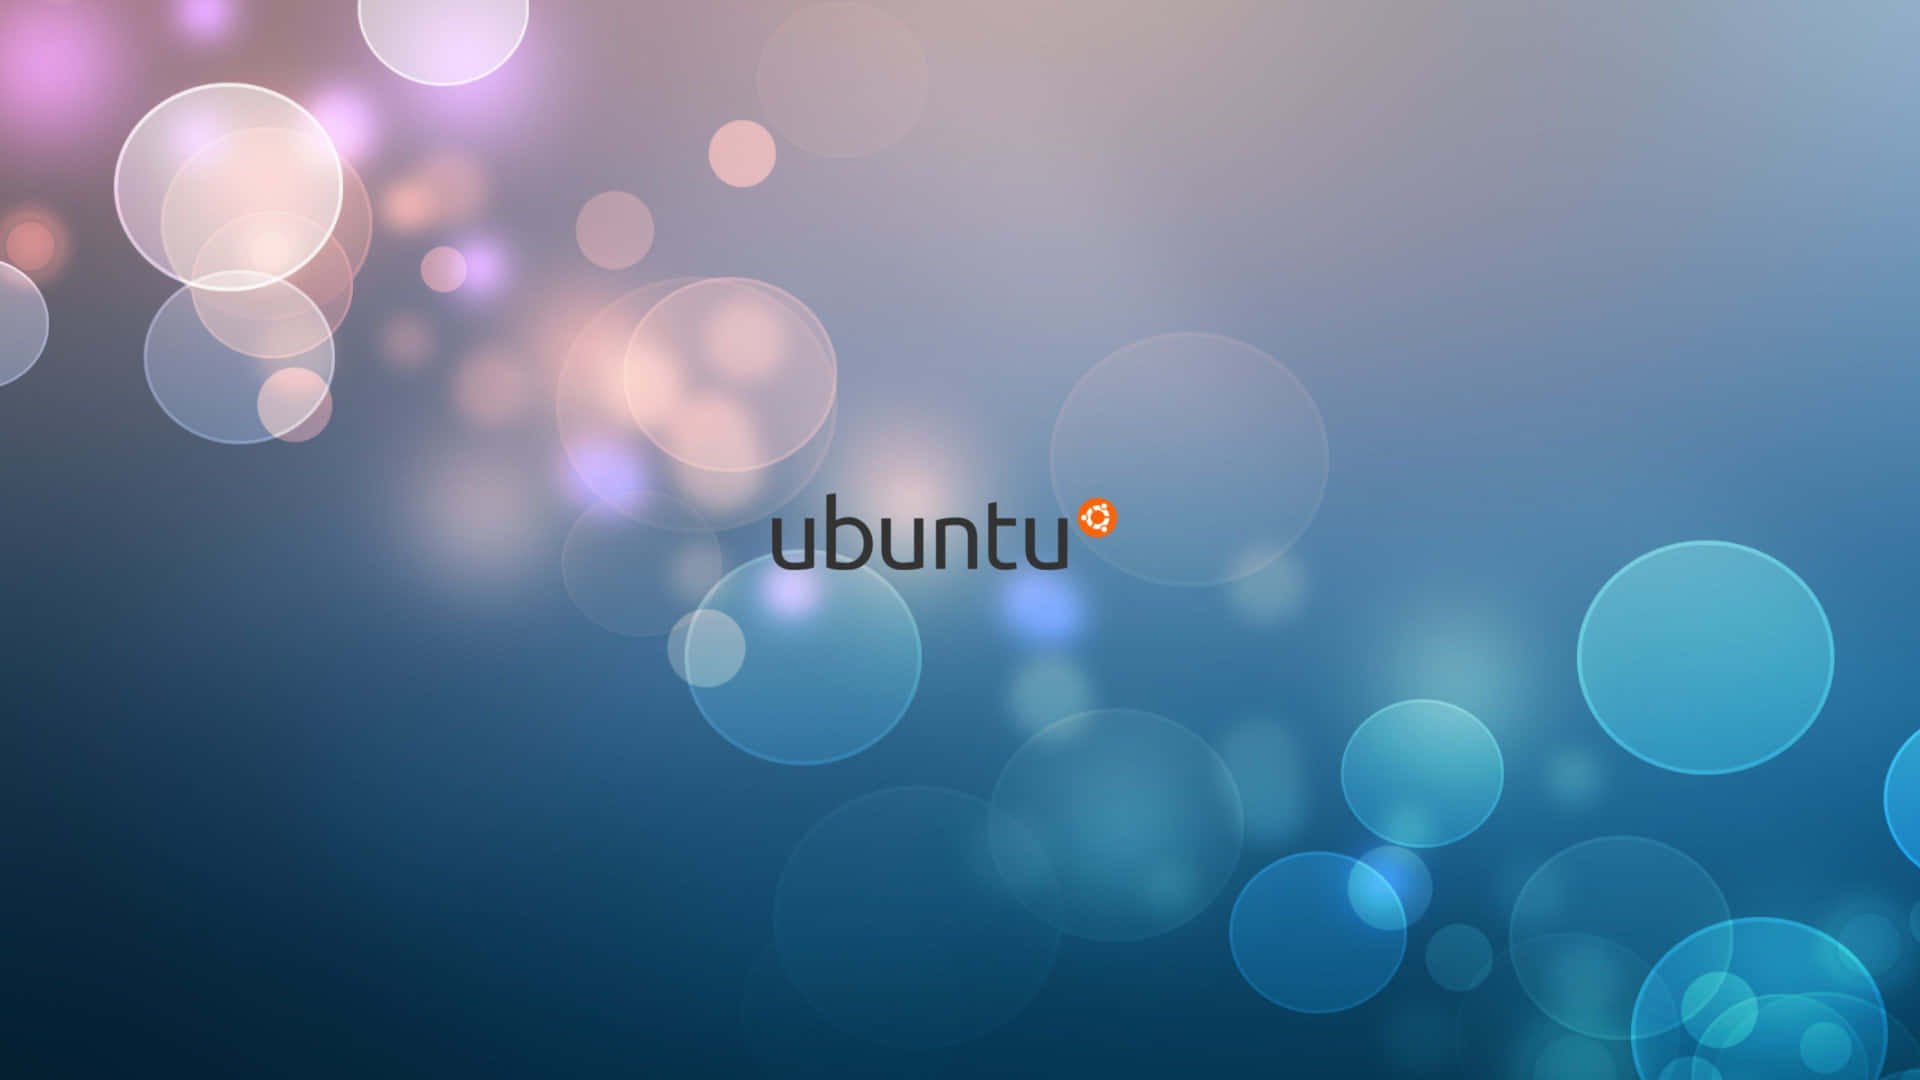 Enjoy a Lightweight and Secure Computing Experience with Ubuntu